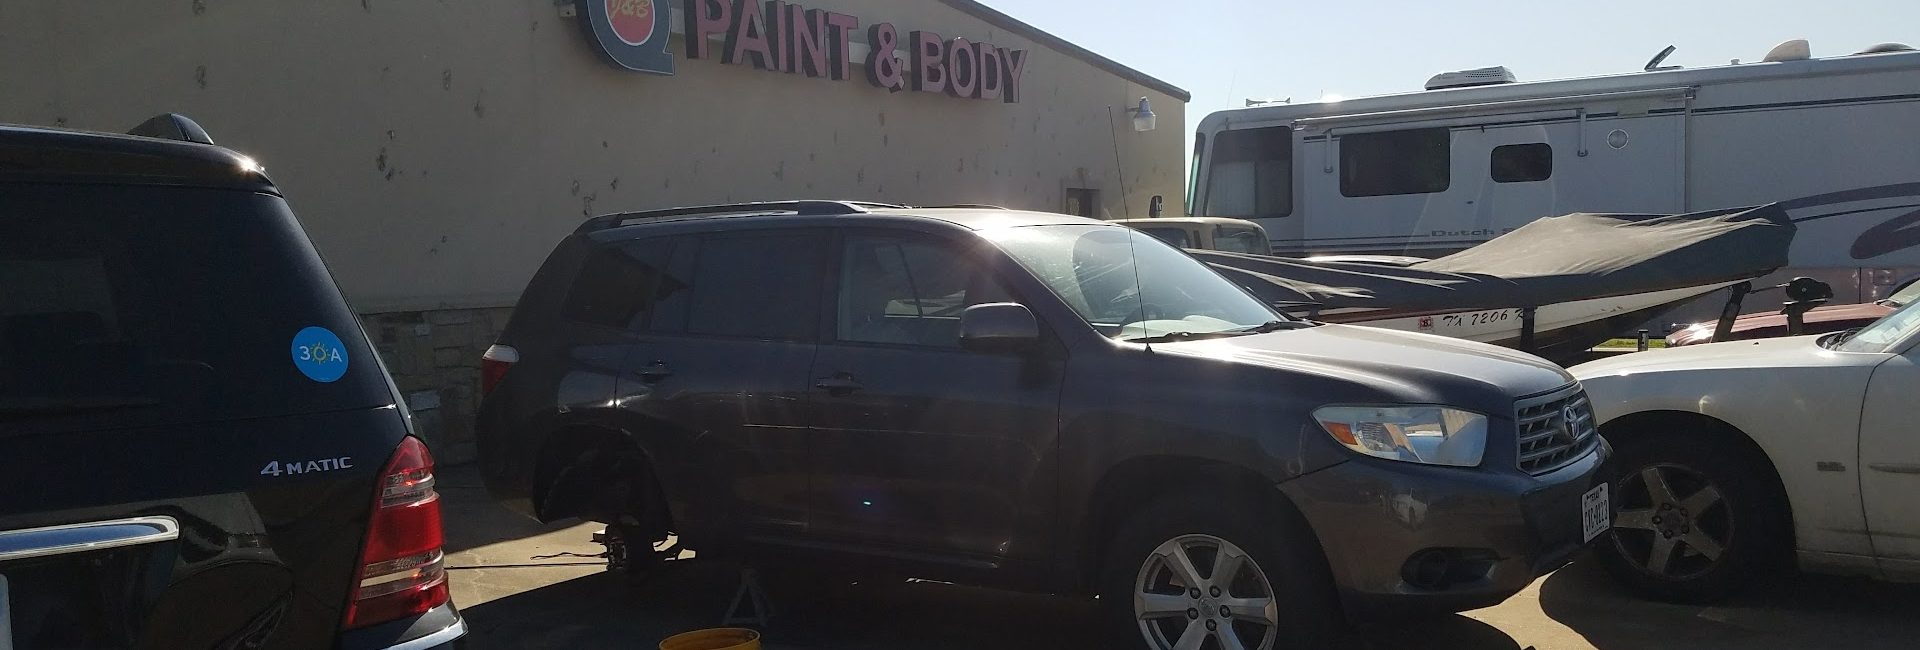 J and B Paint And Body Shop 2